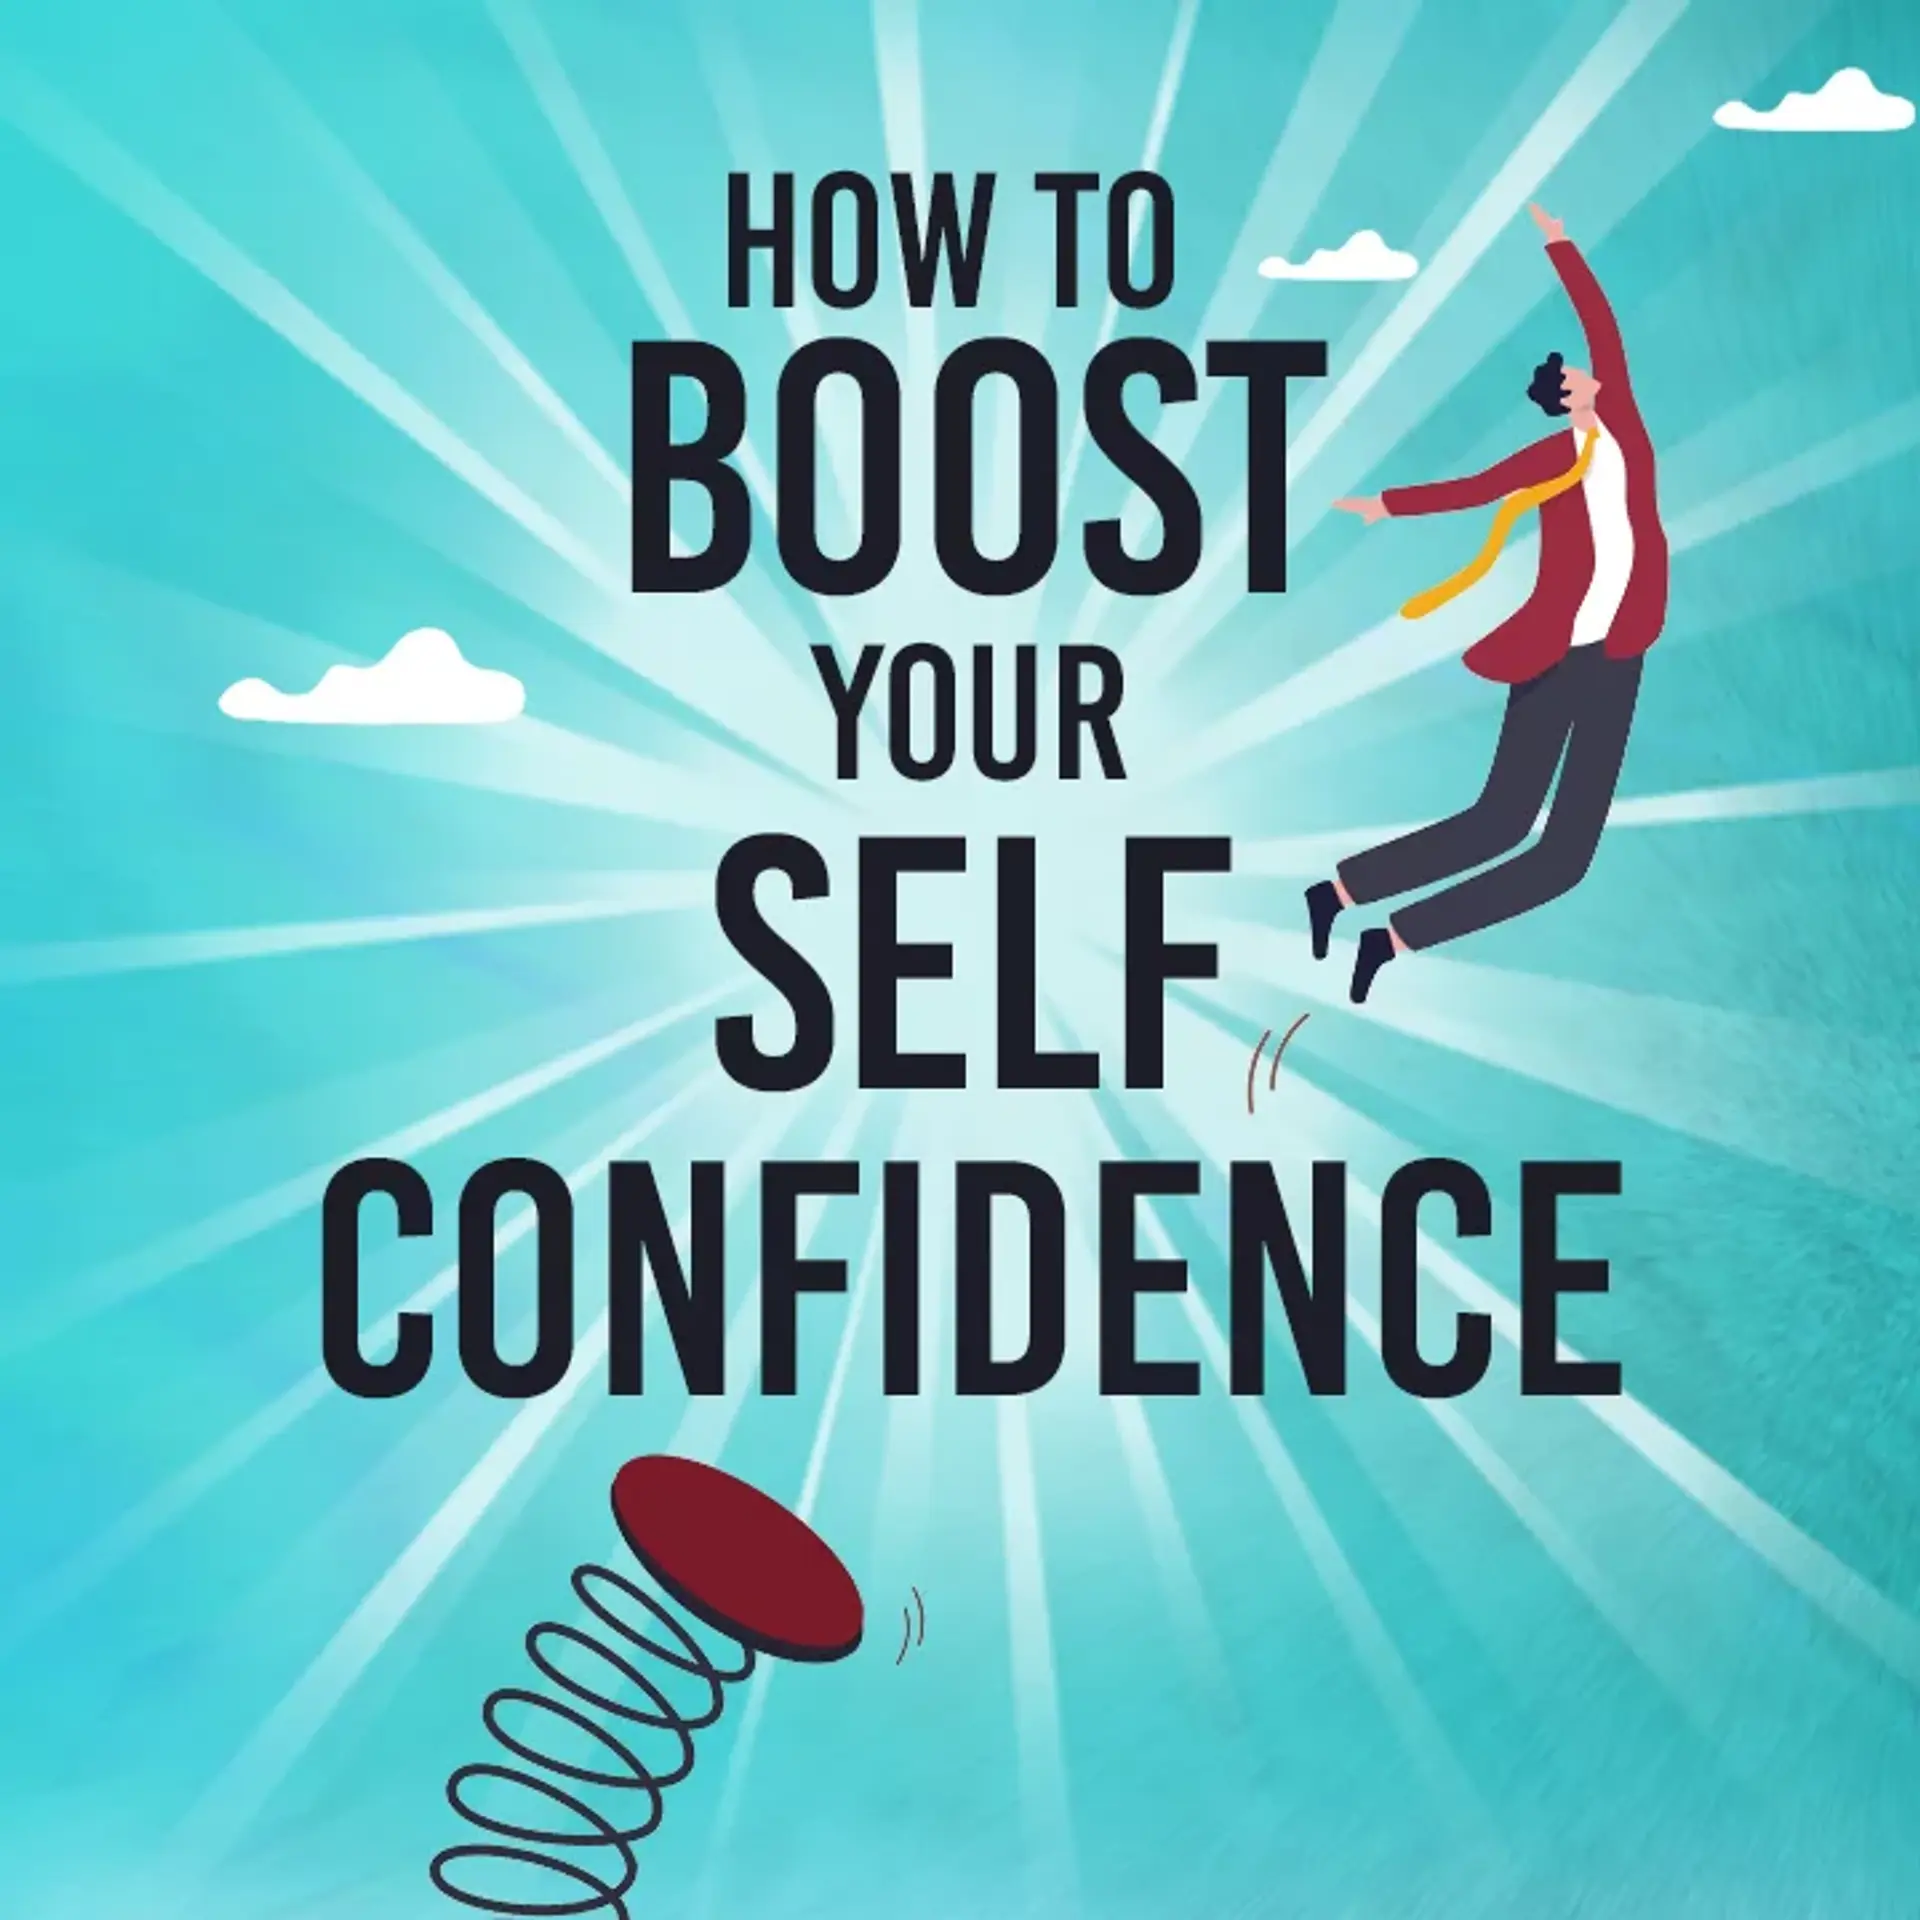 2. Where Does Our Self-Confidence Come From? | 